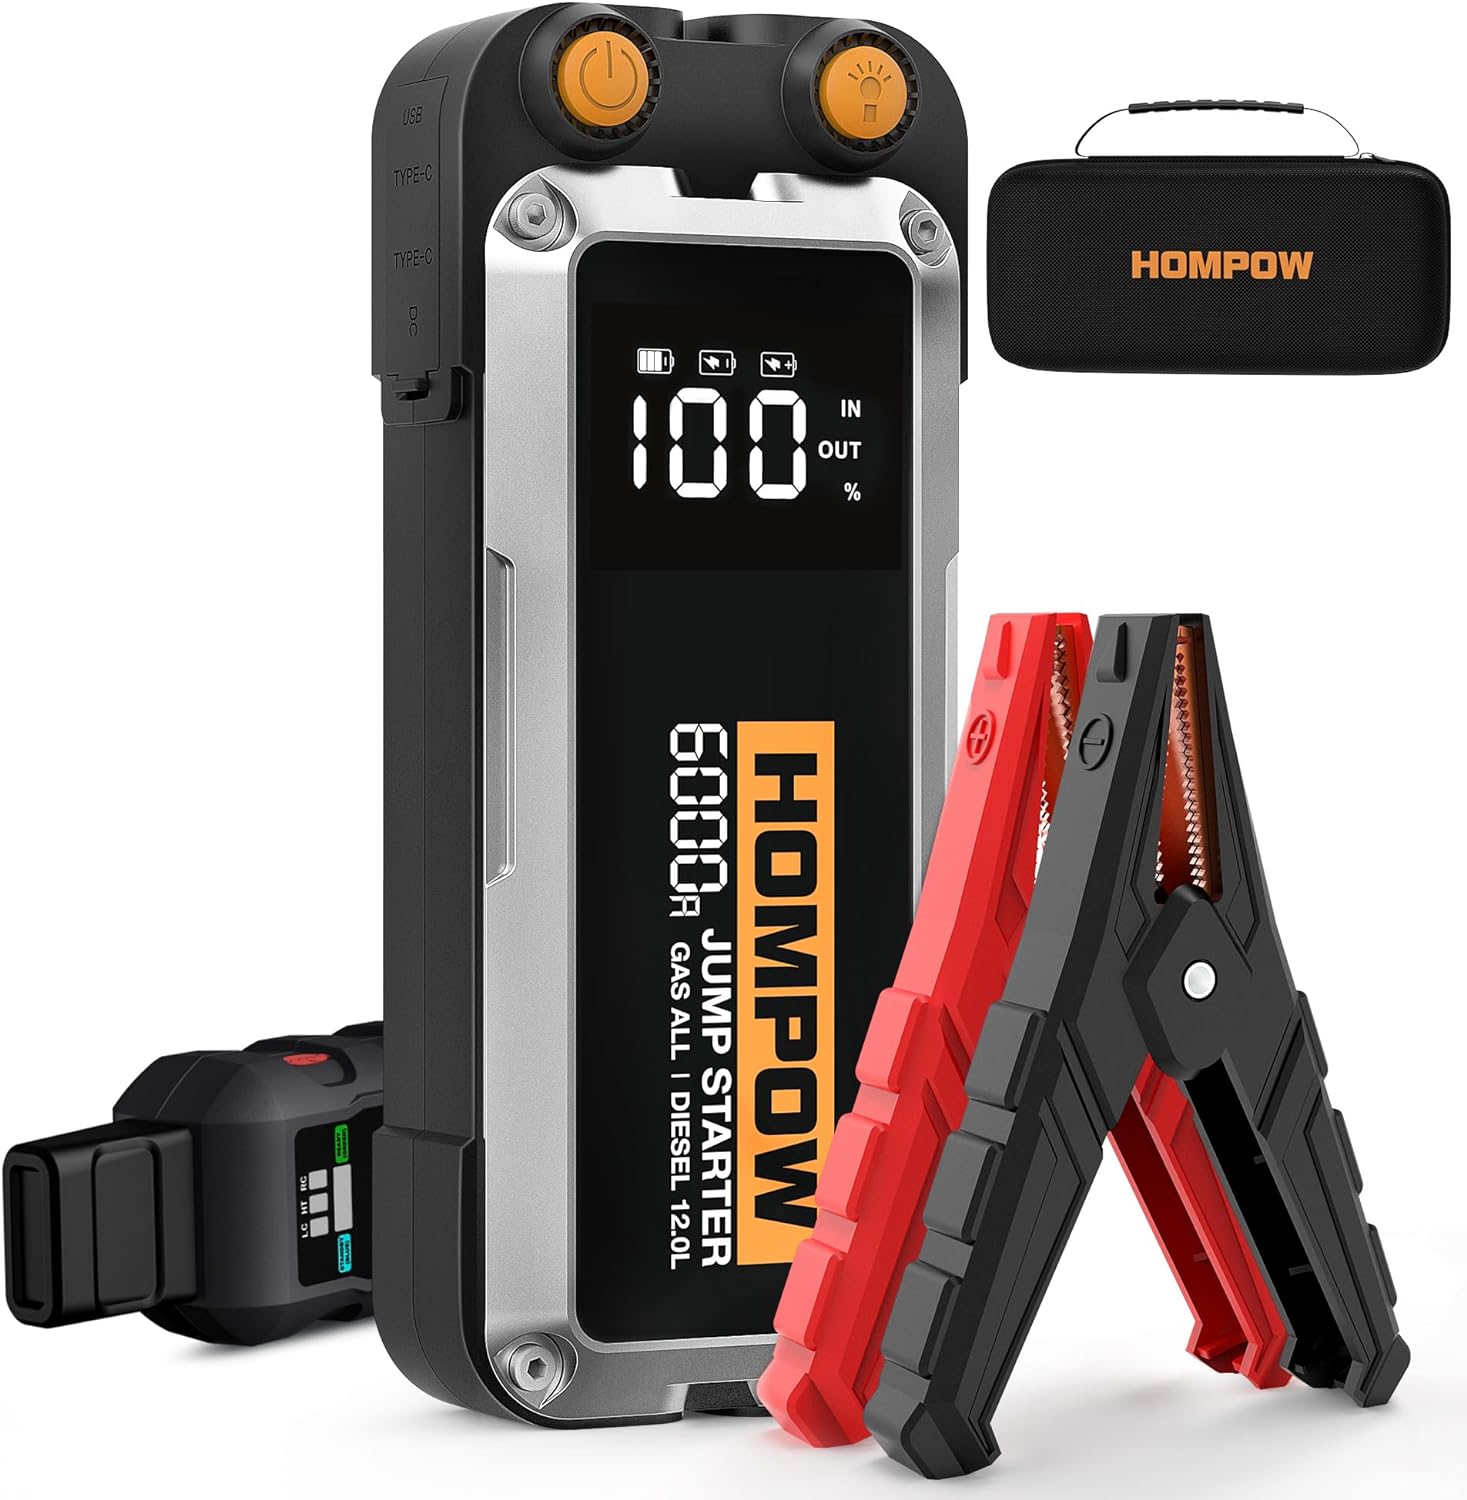 Hompow 6000A Peak Jump Starter Battery Pack Product Image